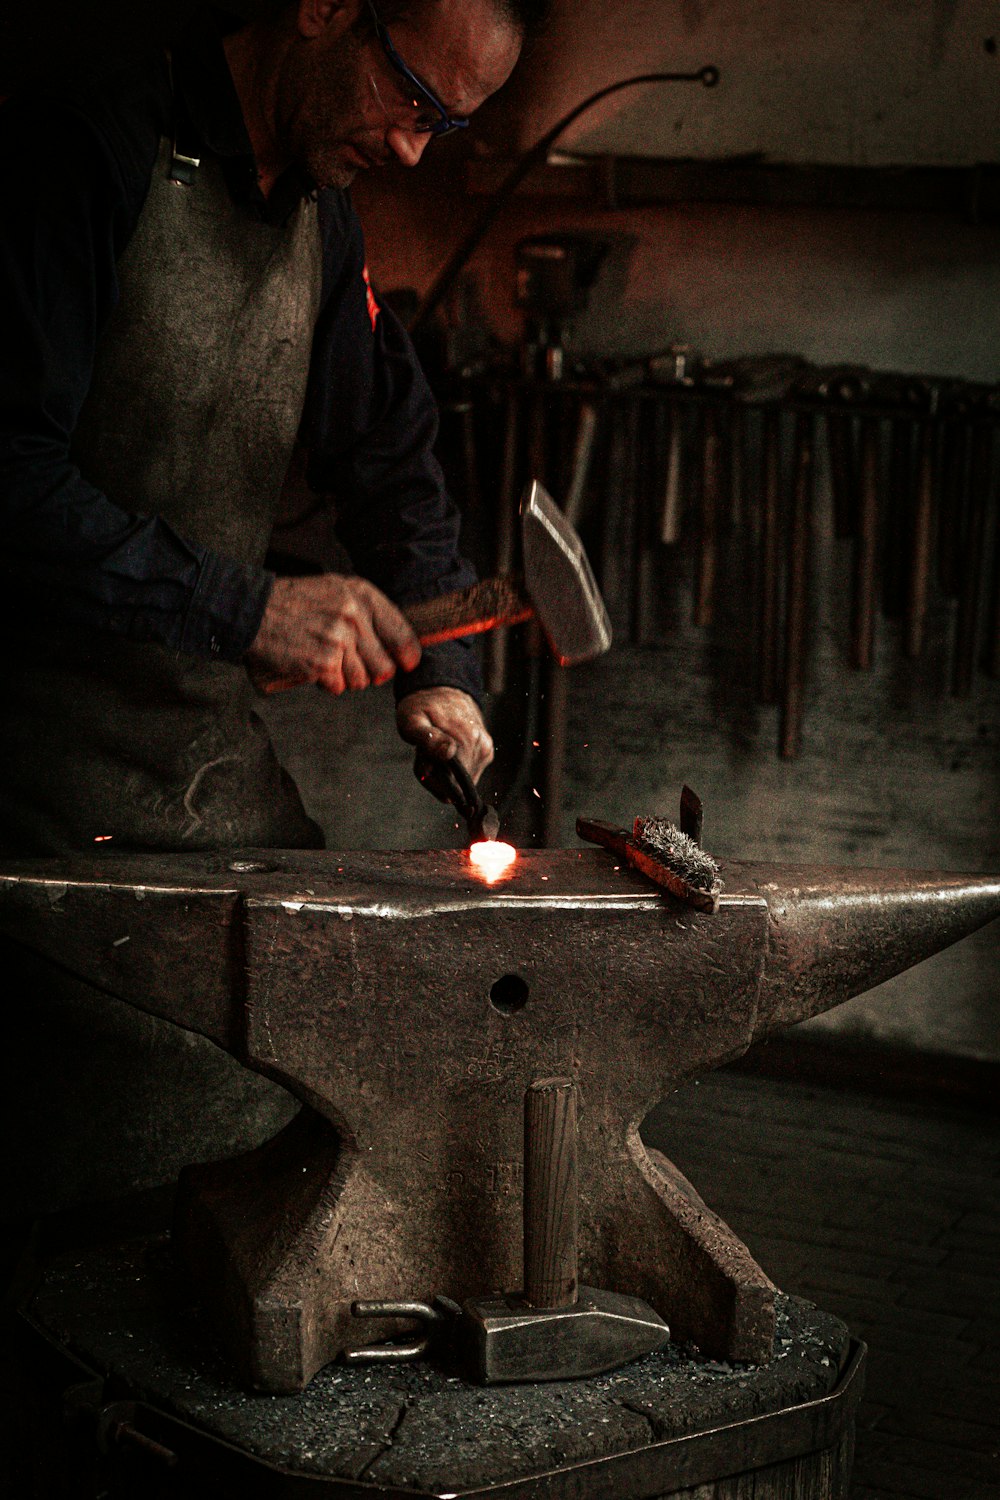 a man working on a piece of metal with a hammer